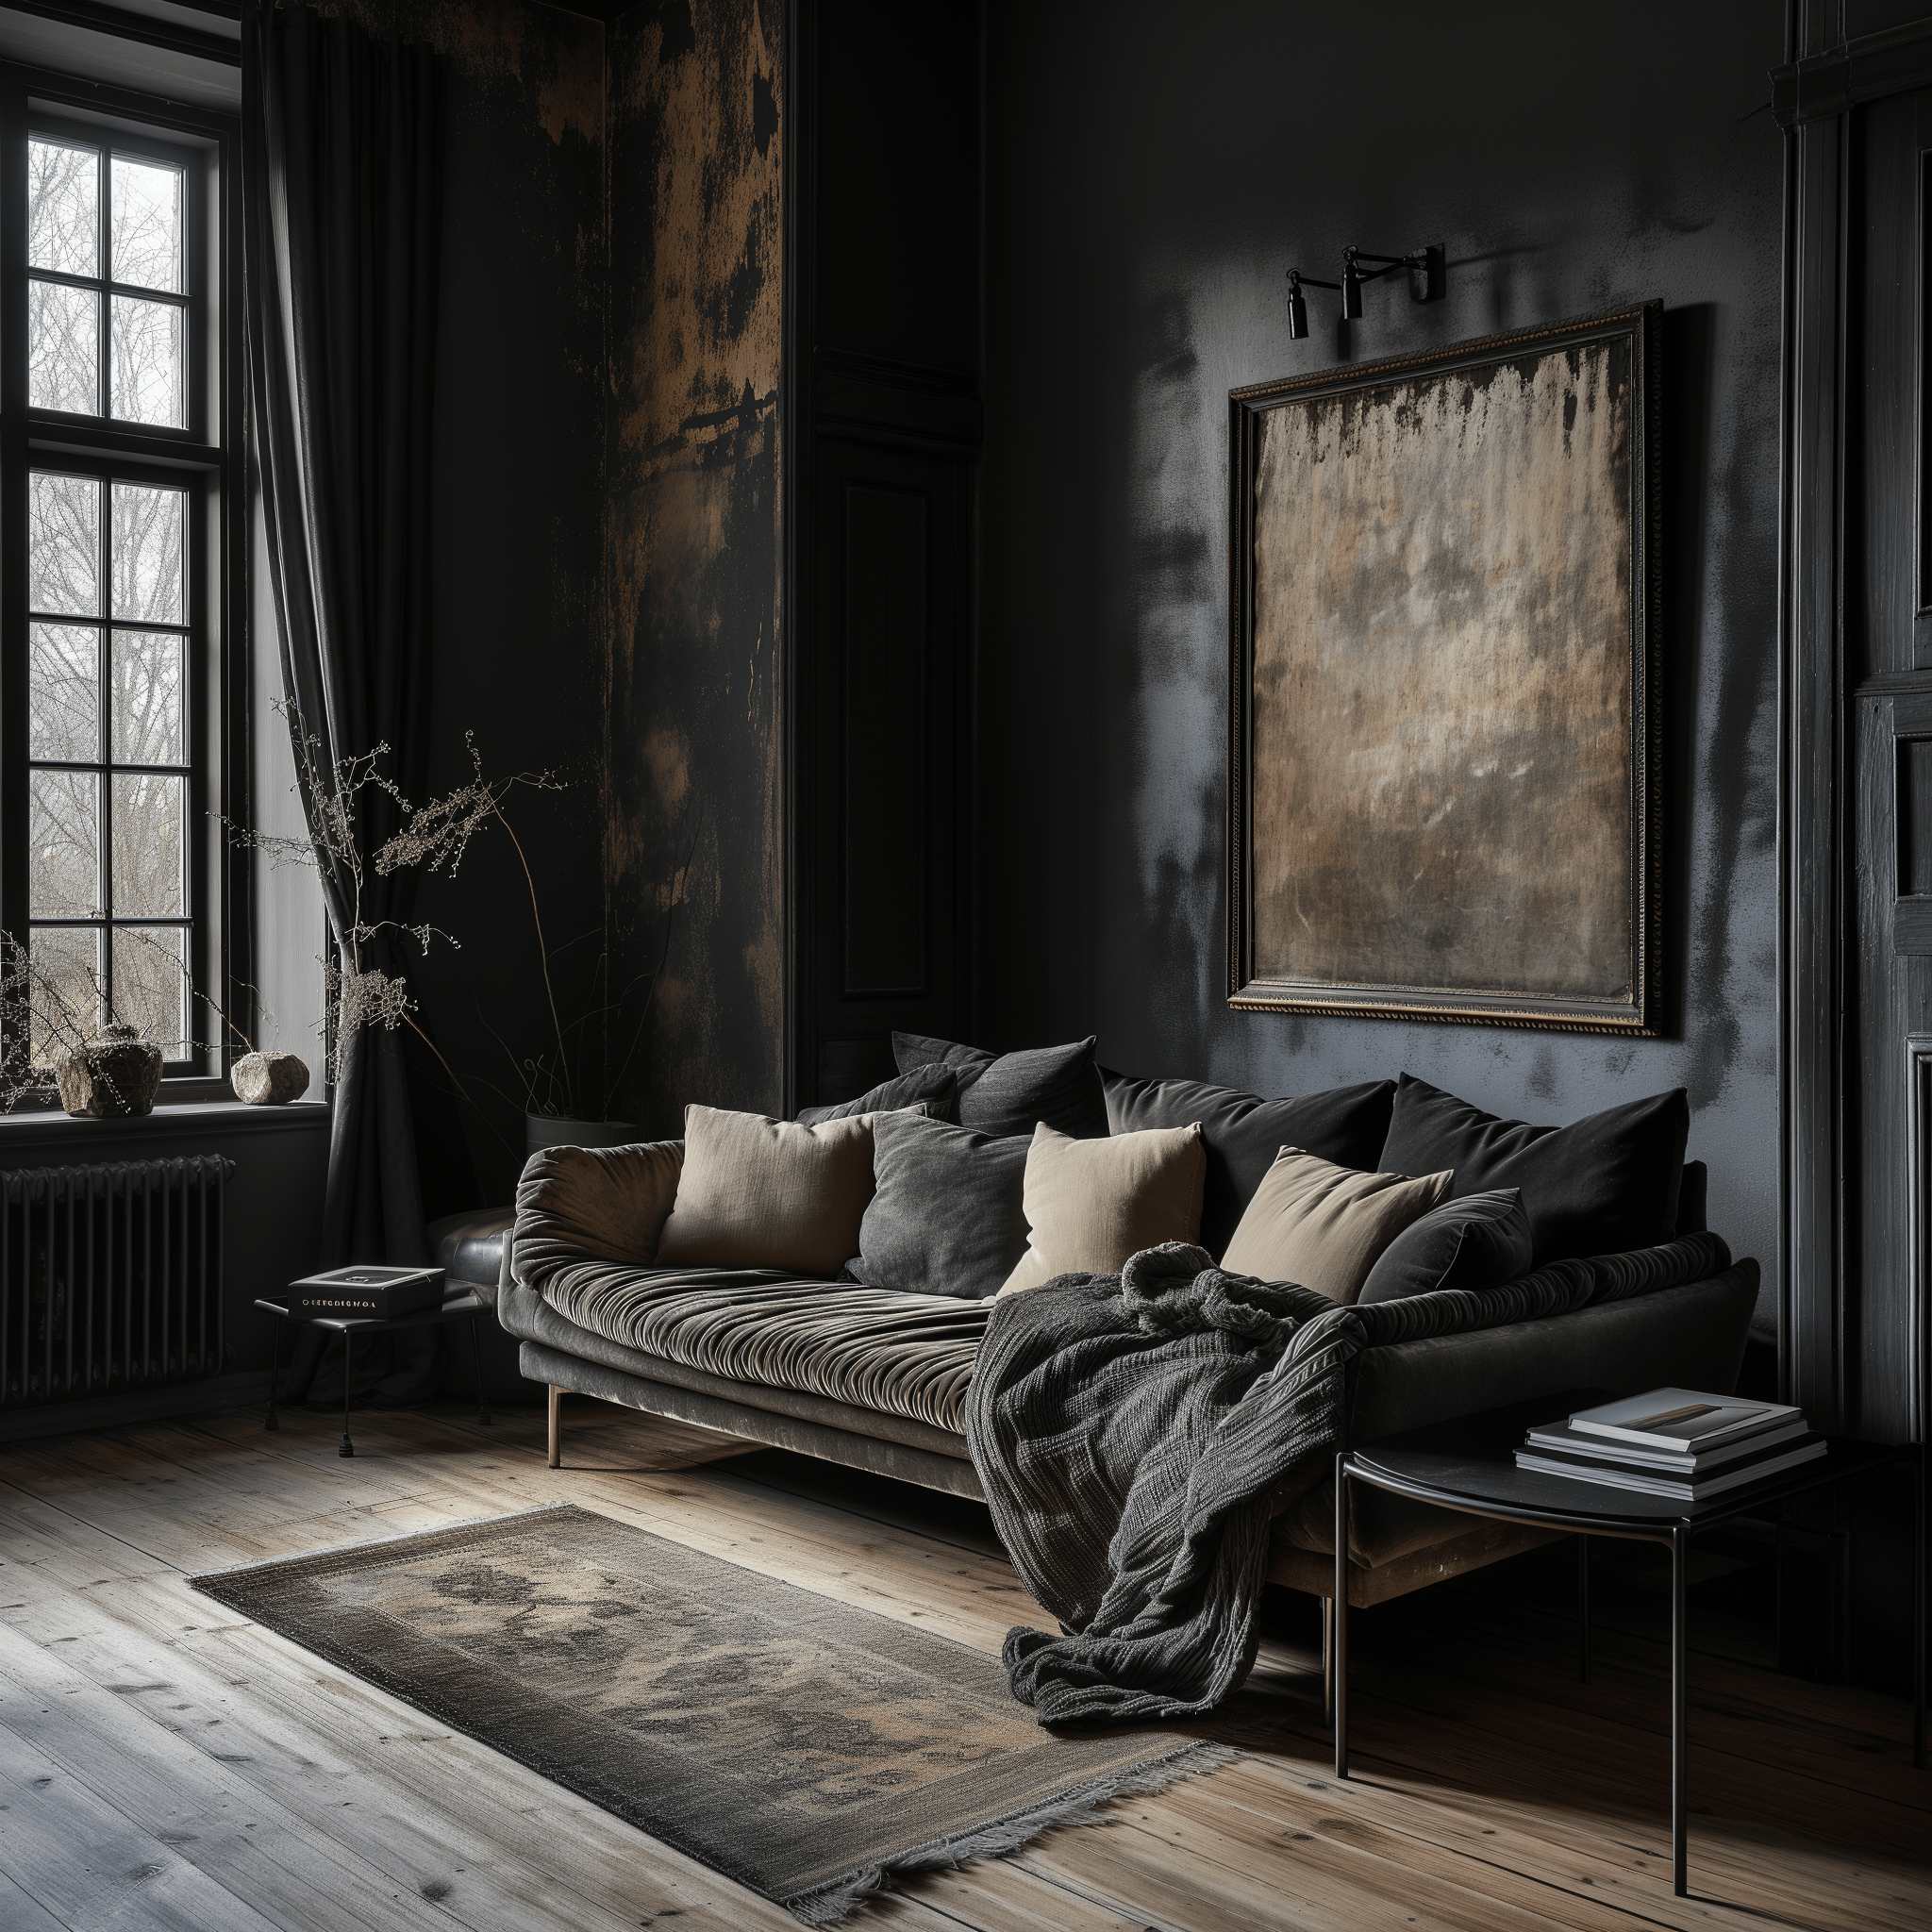 Homely dark living room with eye-level views of luxurious textiles, architectural details, and elegant black furnishings.